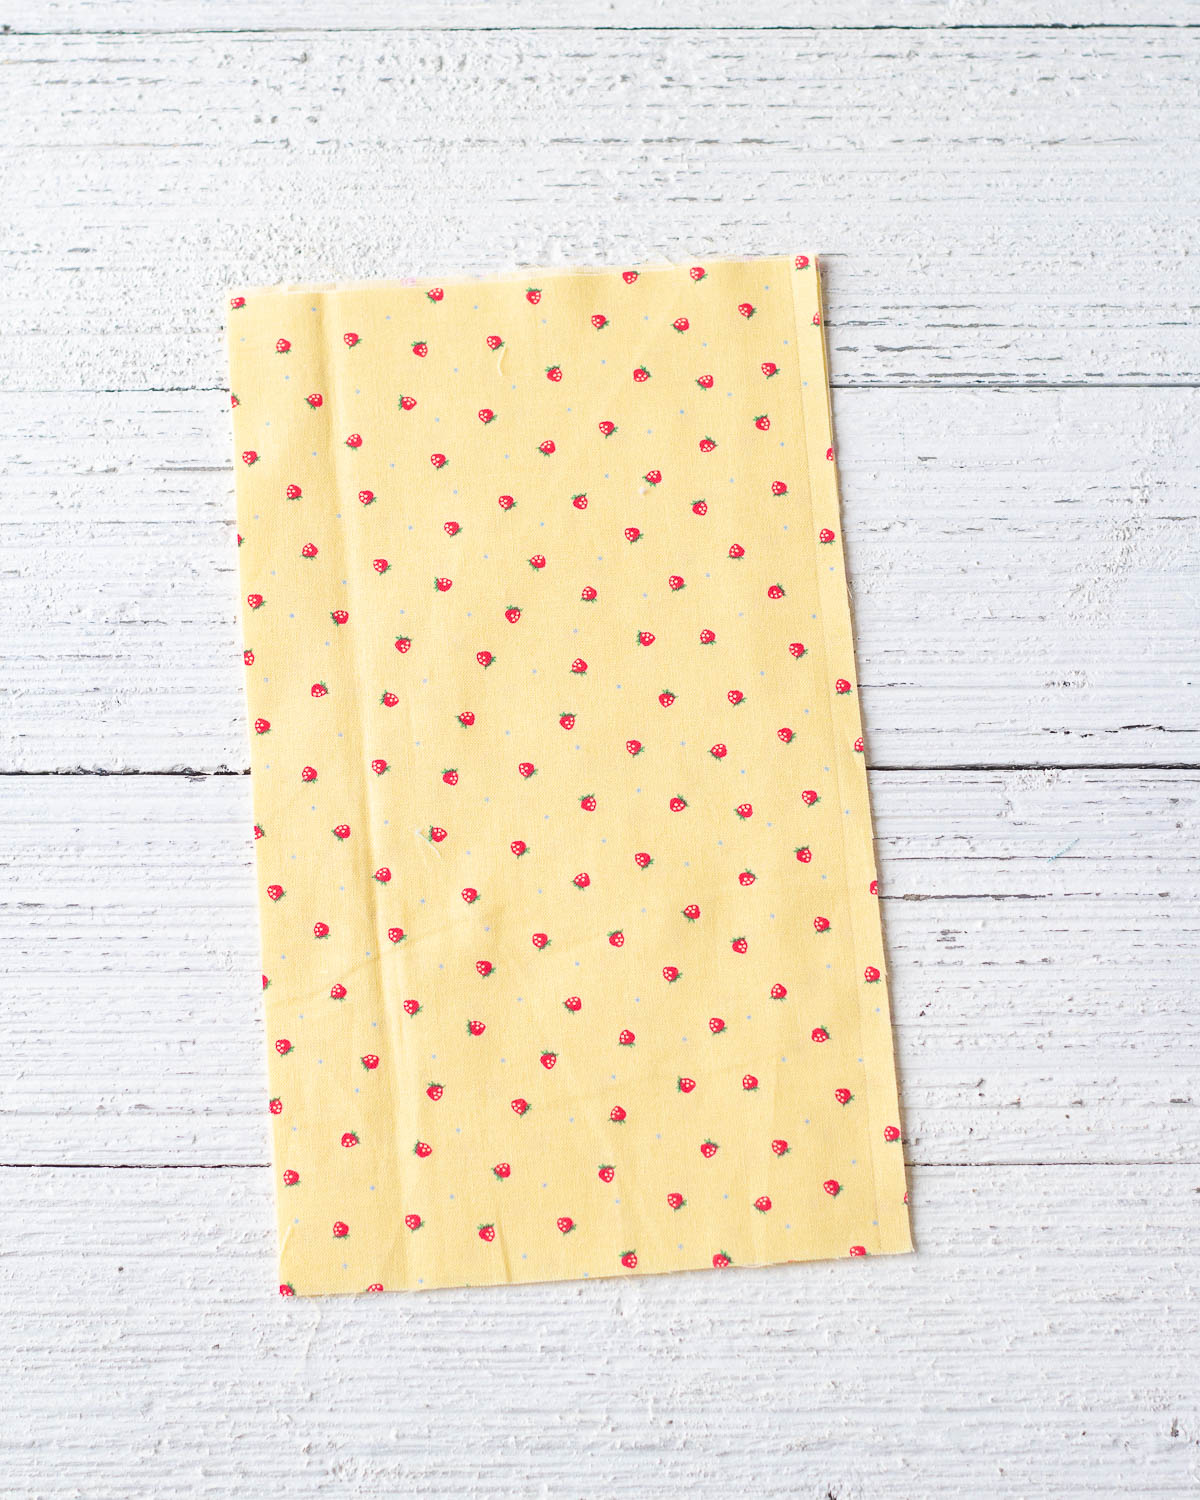 Yellow printed fabric on a wooden surface.